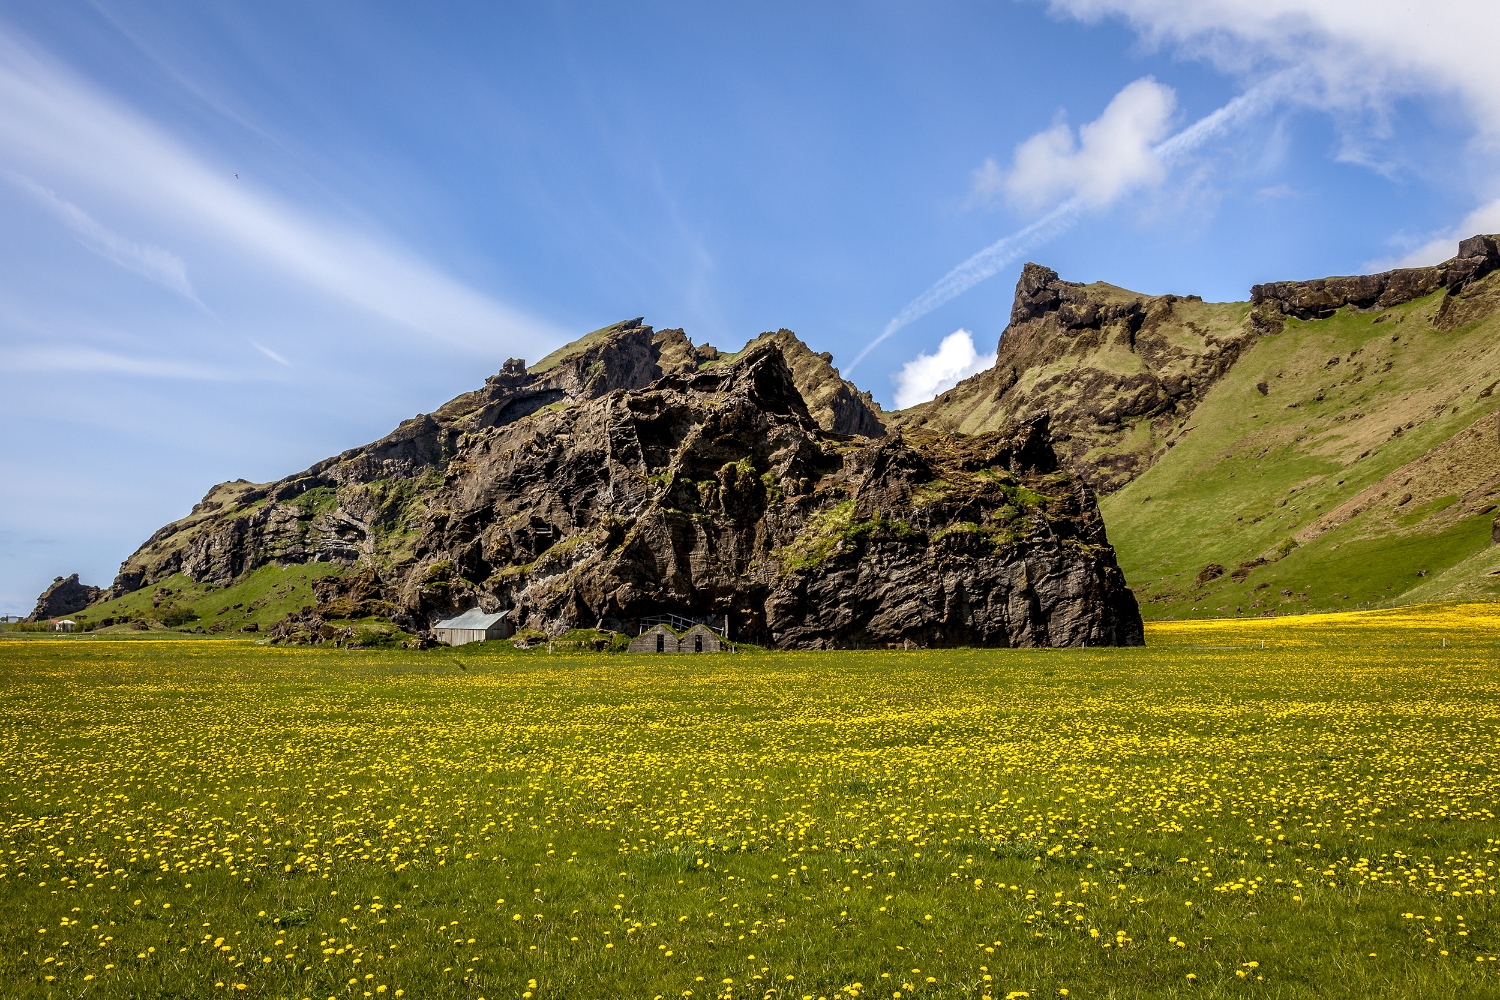 Spring in Iceland